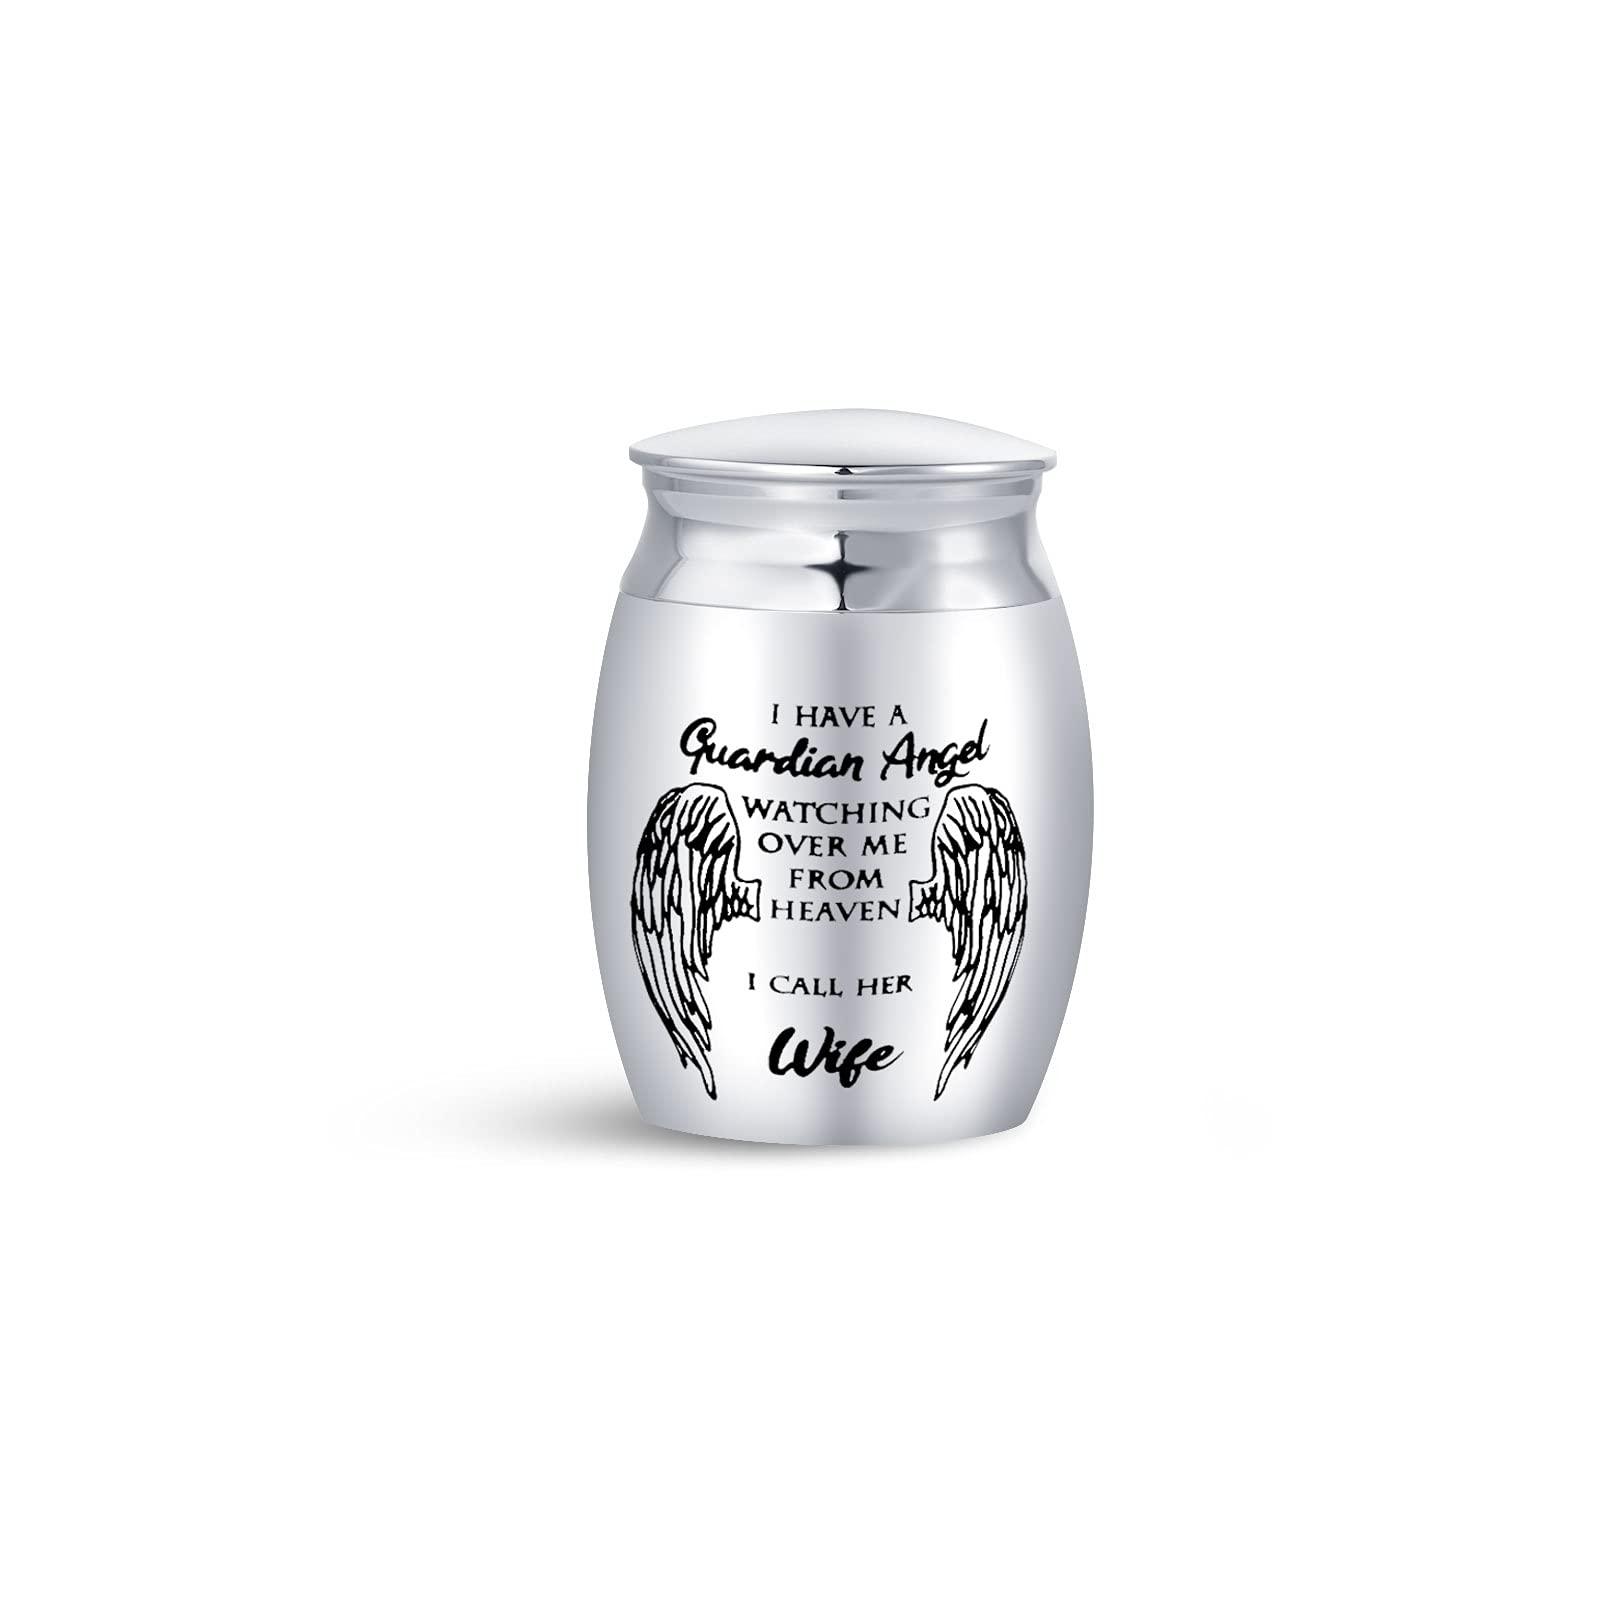 LSxAB I Have A Guardian Angel Wife Cremation Urn for Human Ashes Memorial Small Adult Funeral Share Mini Urns Keepsake